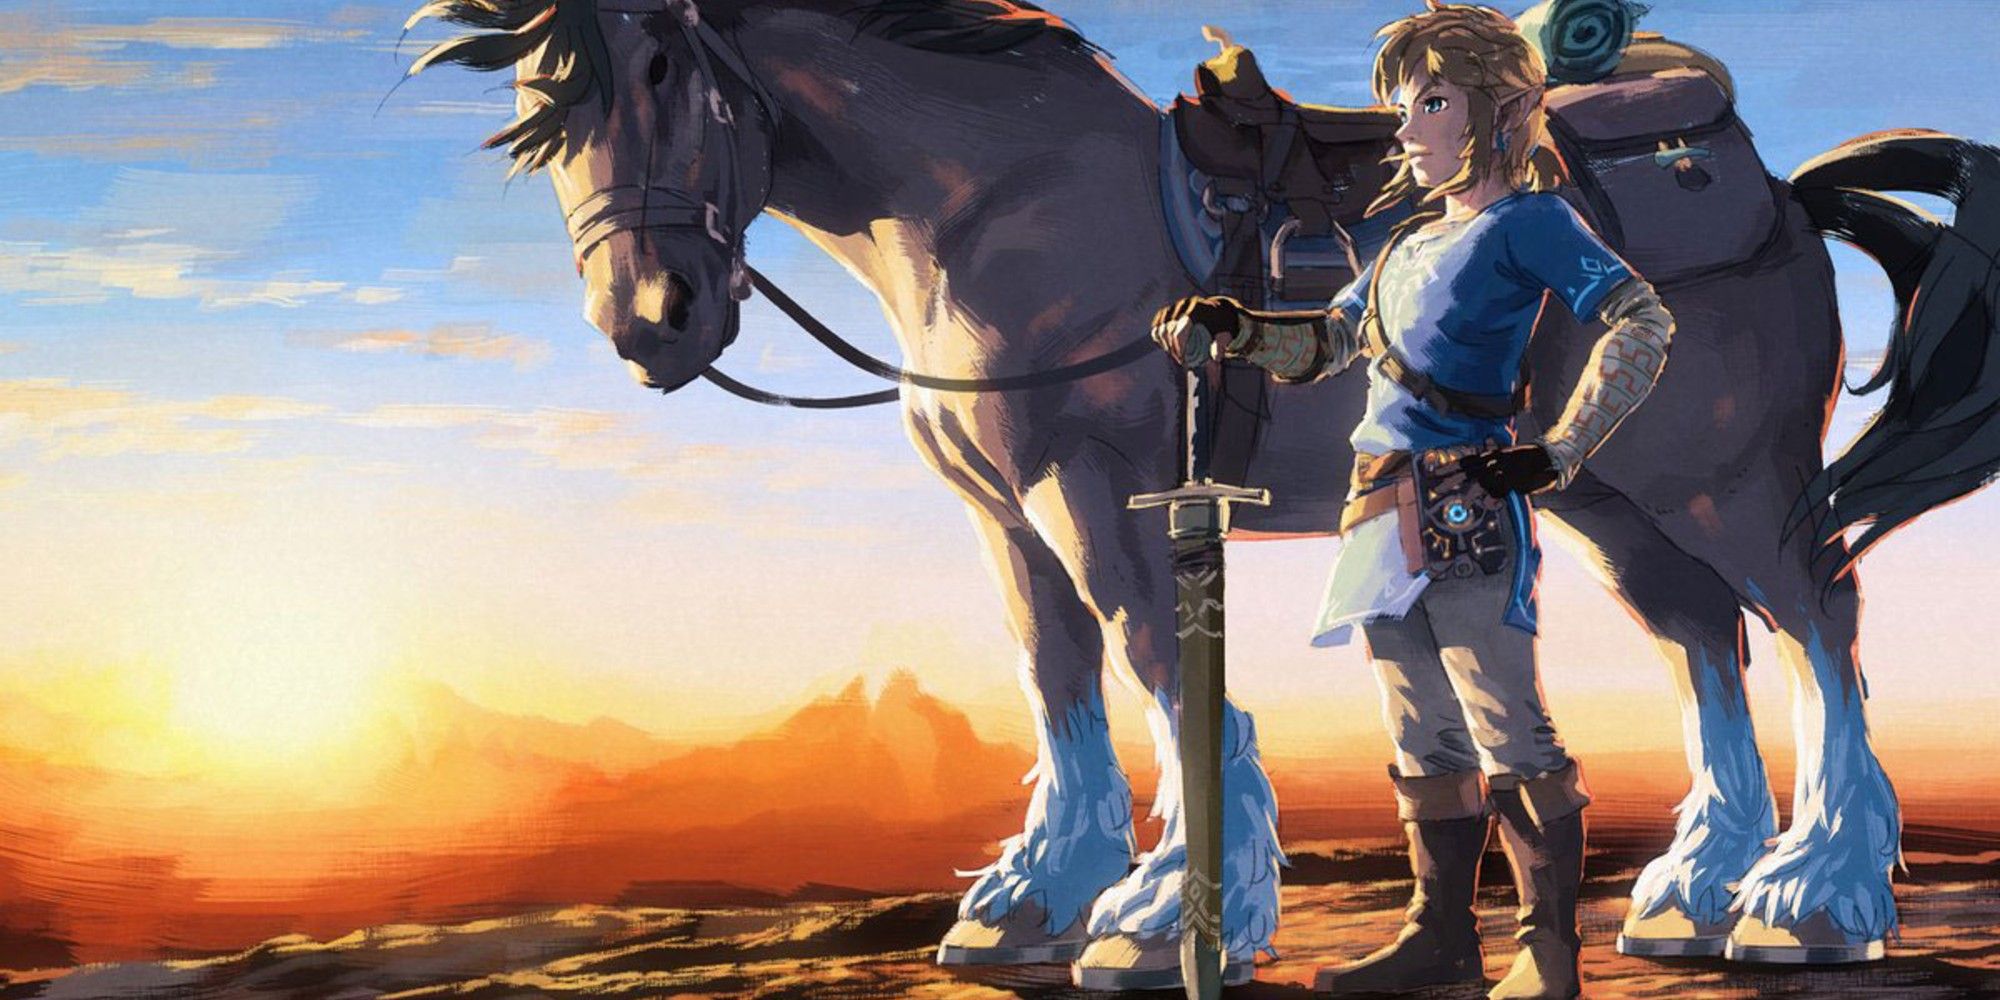 Breath of the Wild art featuring Link standing beside Epona while holding his sword in its scabbard against the ground, almost like a walking stick.